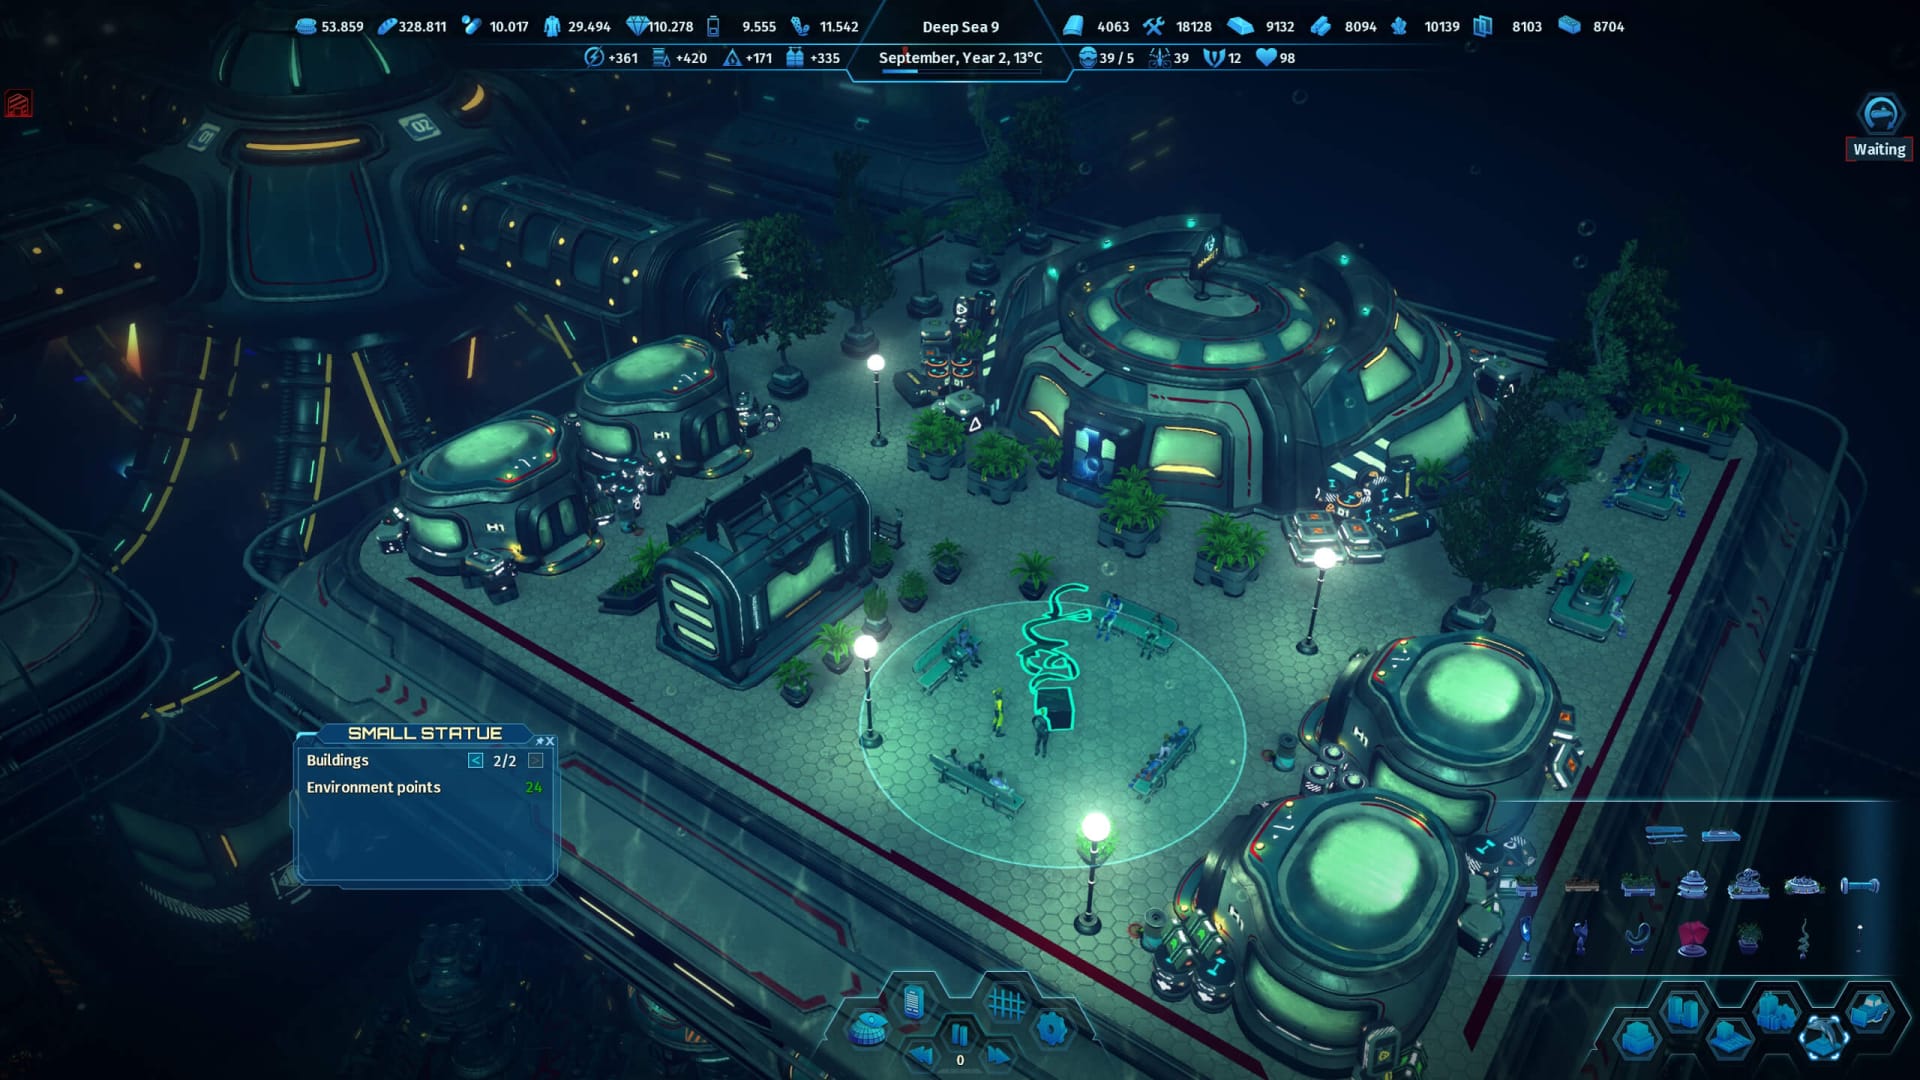 Aquatico screenshot shows a city and how the game's UI will look.